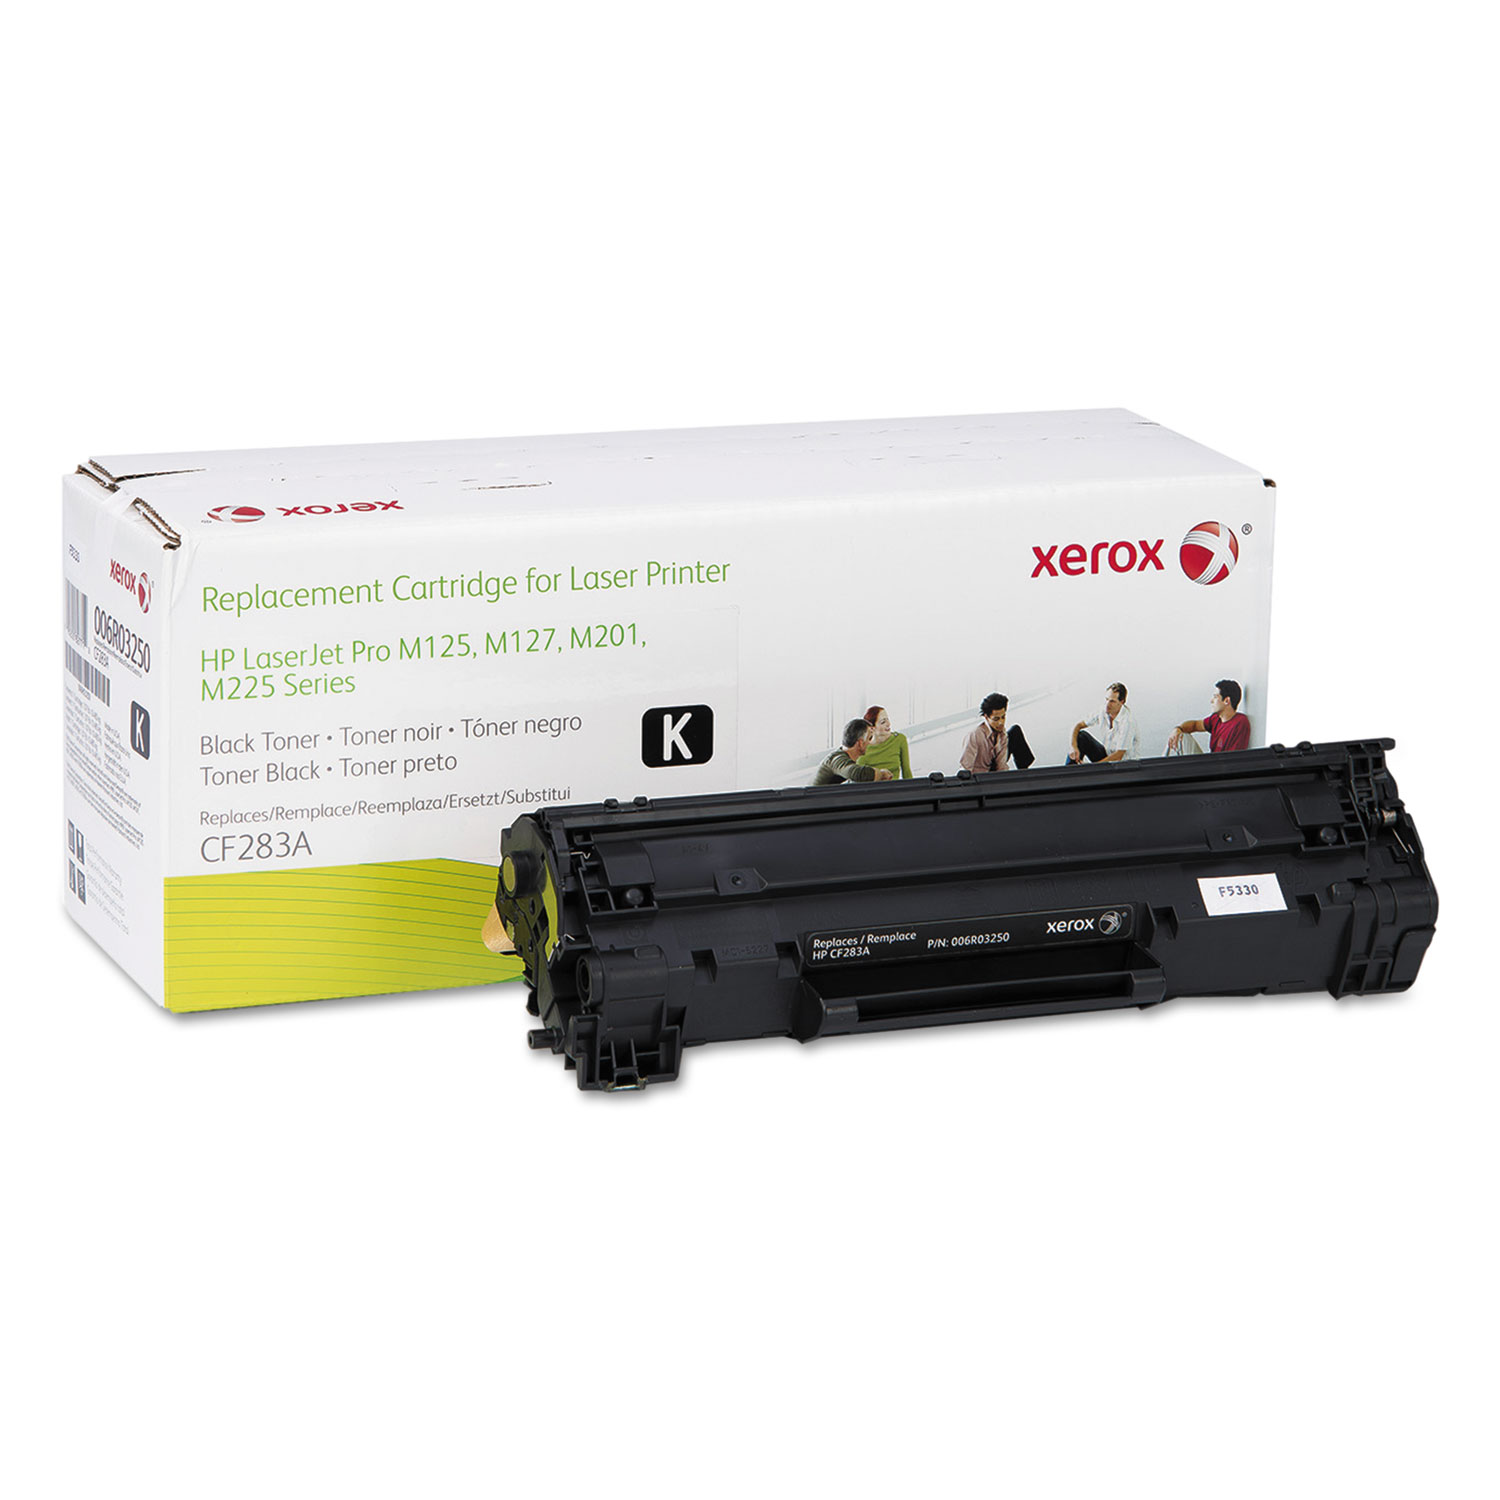  Xerox 006R03250 006R03250 Remanufactured CF283A (83A) Toner, 1500 Page-Yield, Black (XER006R03250) 